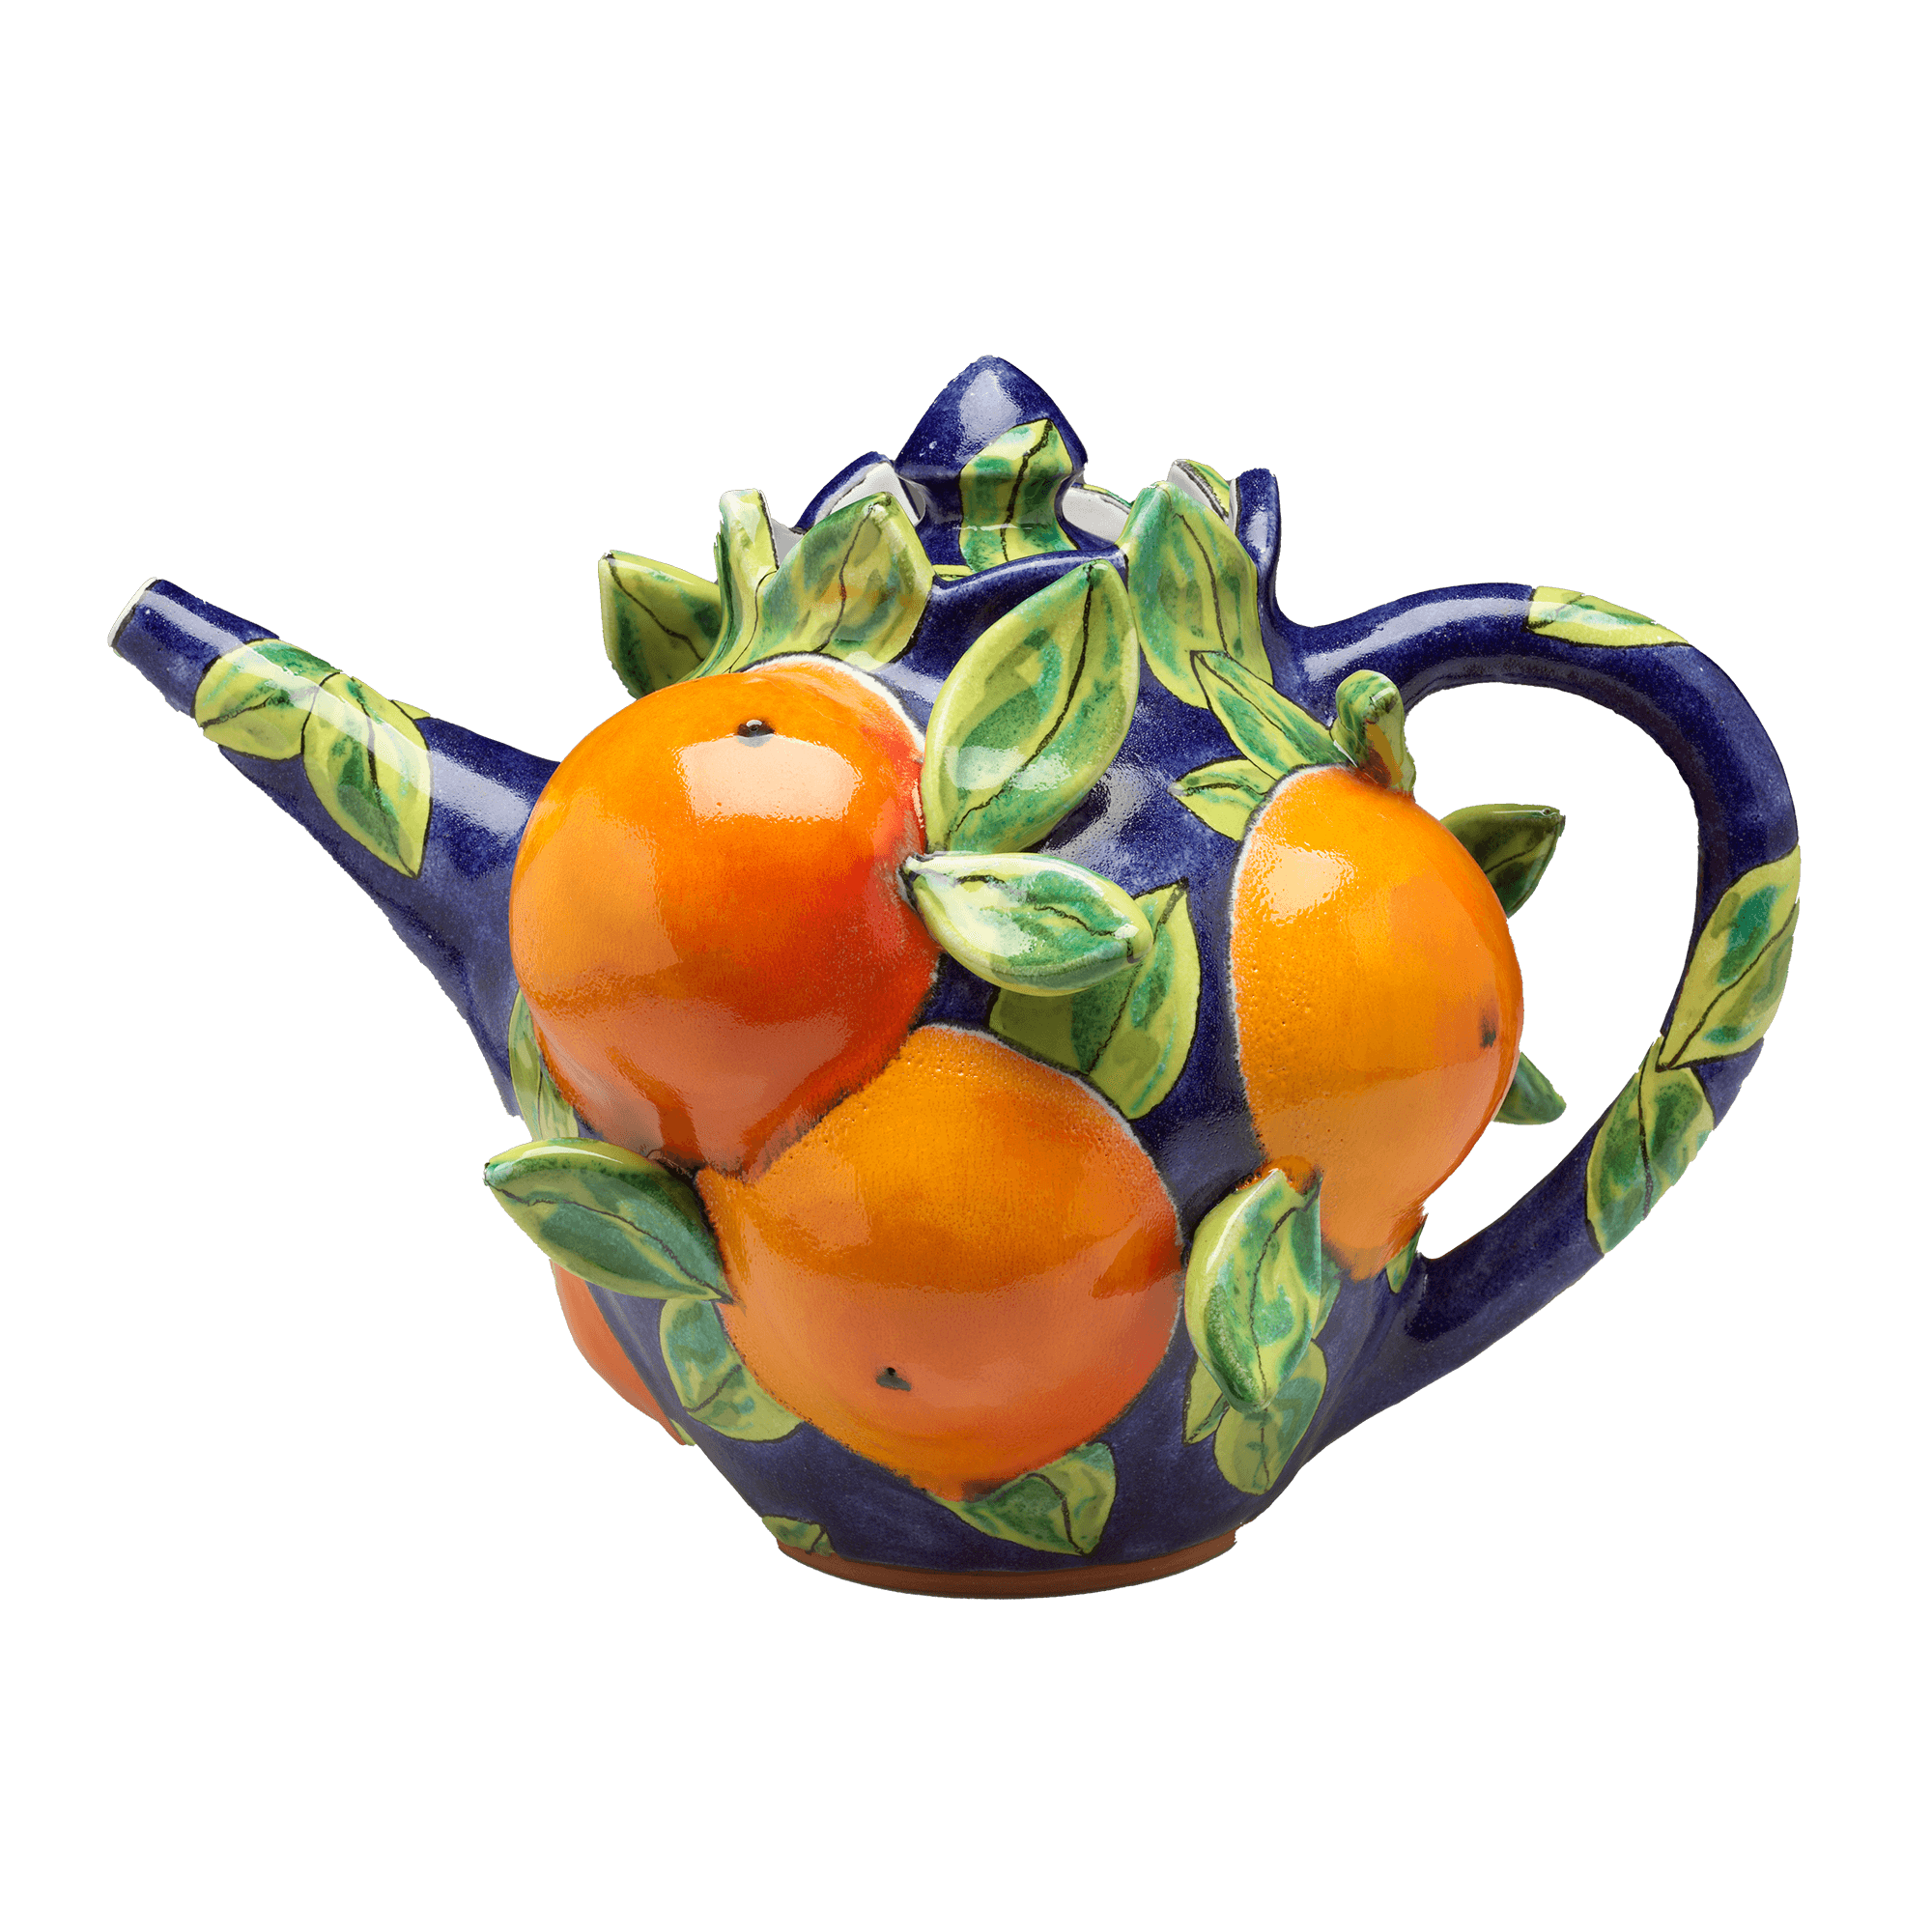 /A%20dark%20blue%20teapot%20covered%20in%20oranges%20and%20green%20leaves%20in%20high%20relief.